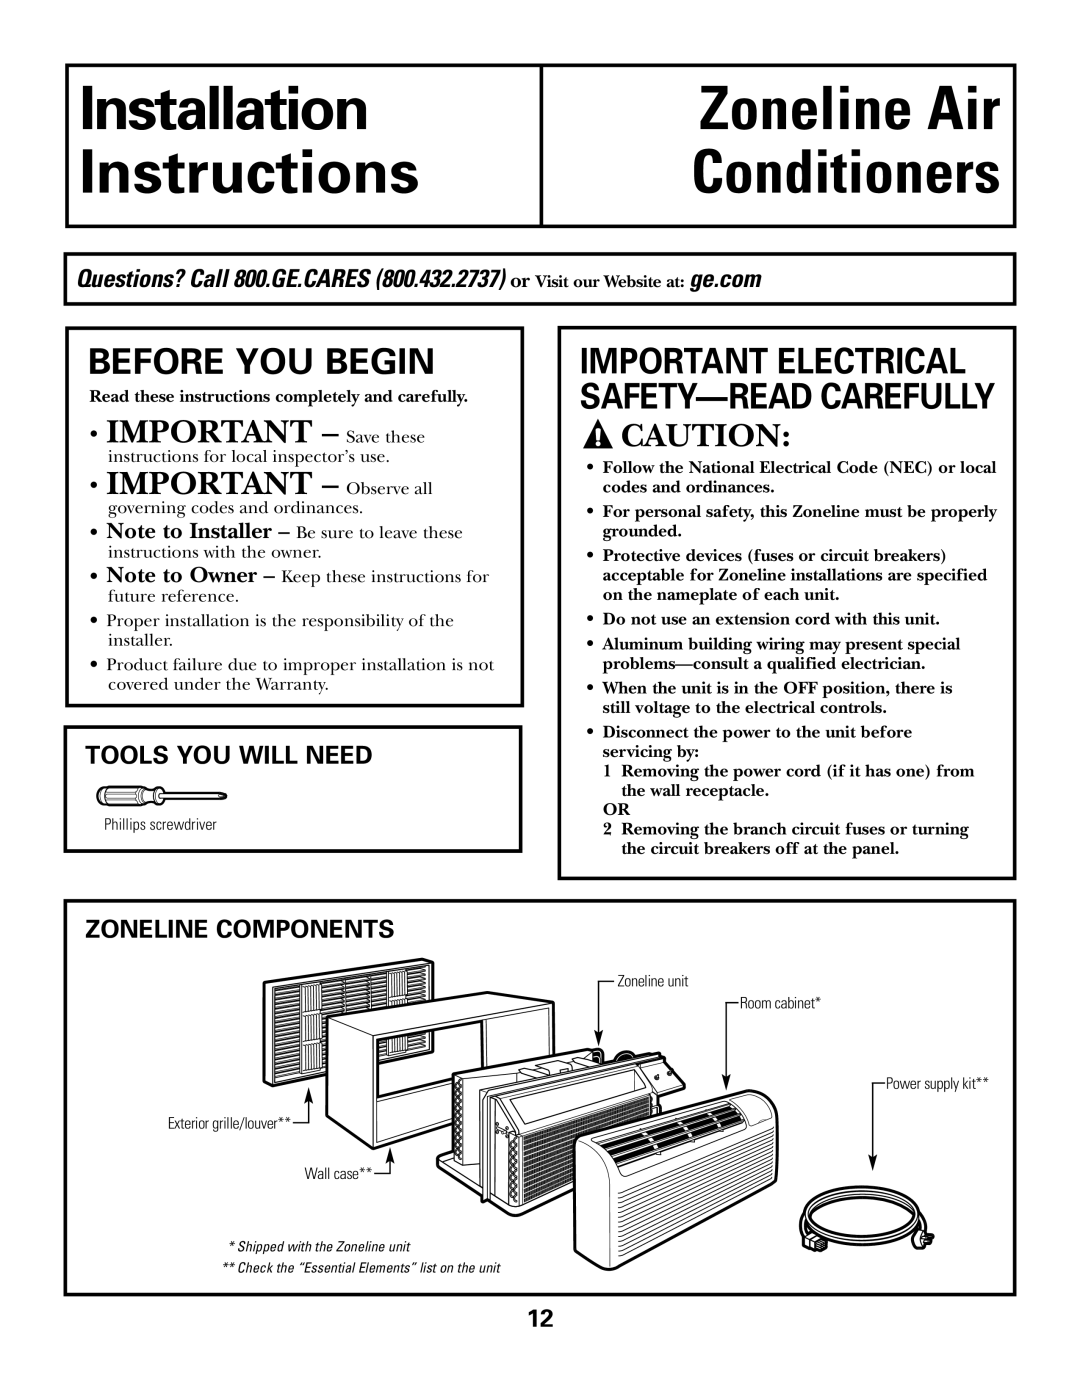 GE 3800 Installation Instructions, Zoneline Air Conditioners, Before You Begin, IMPORTANT - Save these 